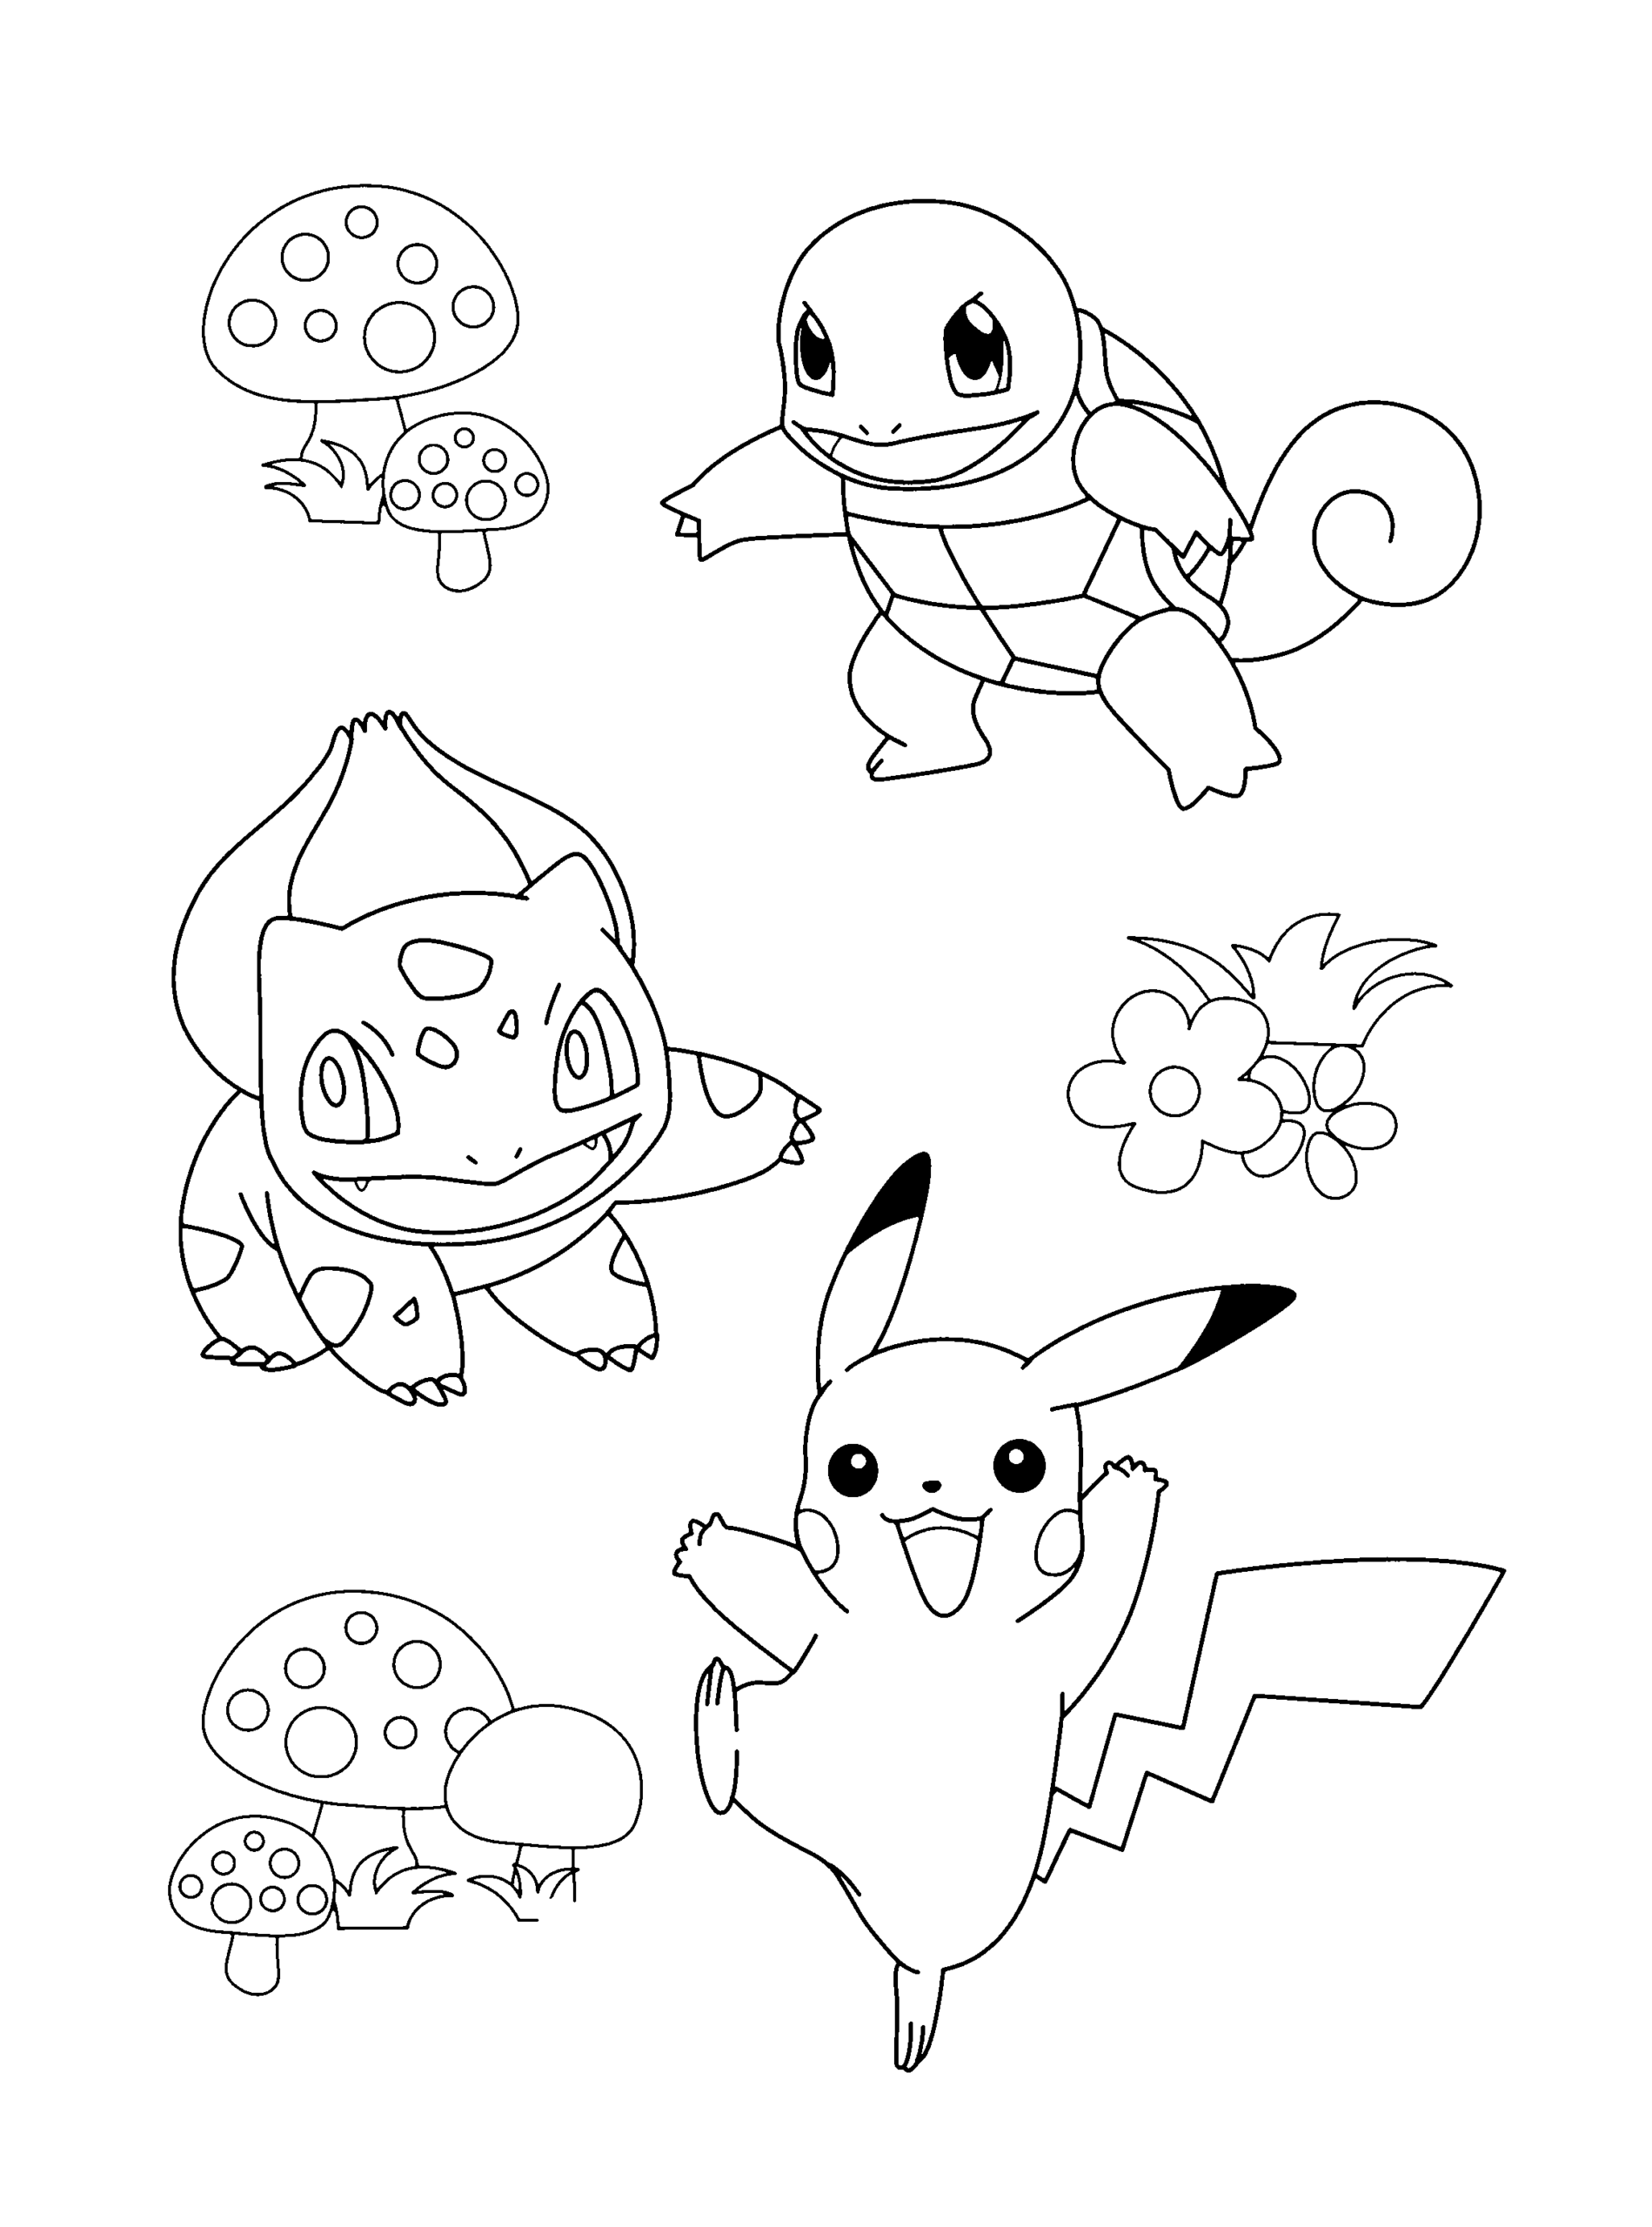 squirtle pikachu and charmander together coloring pages